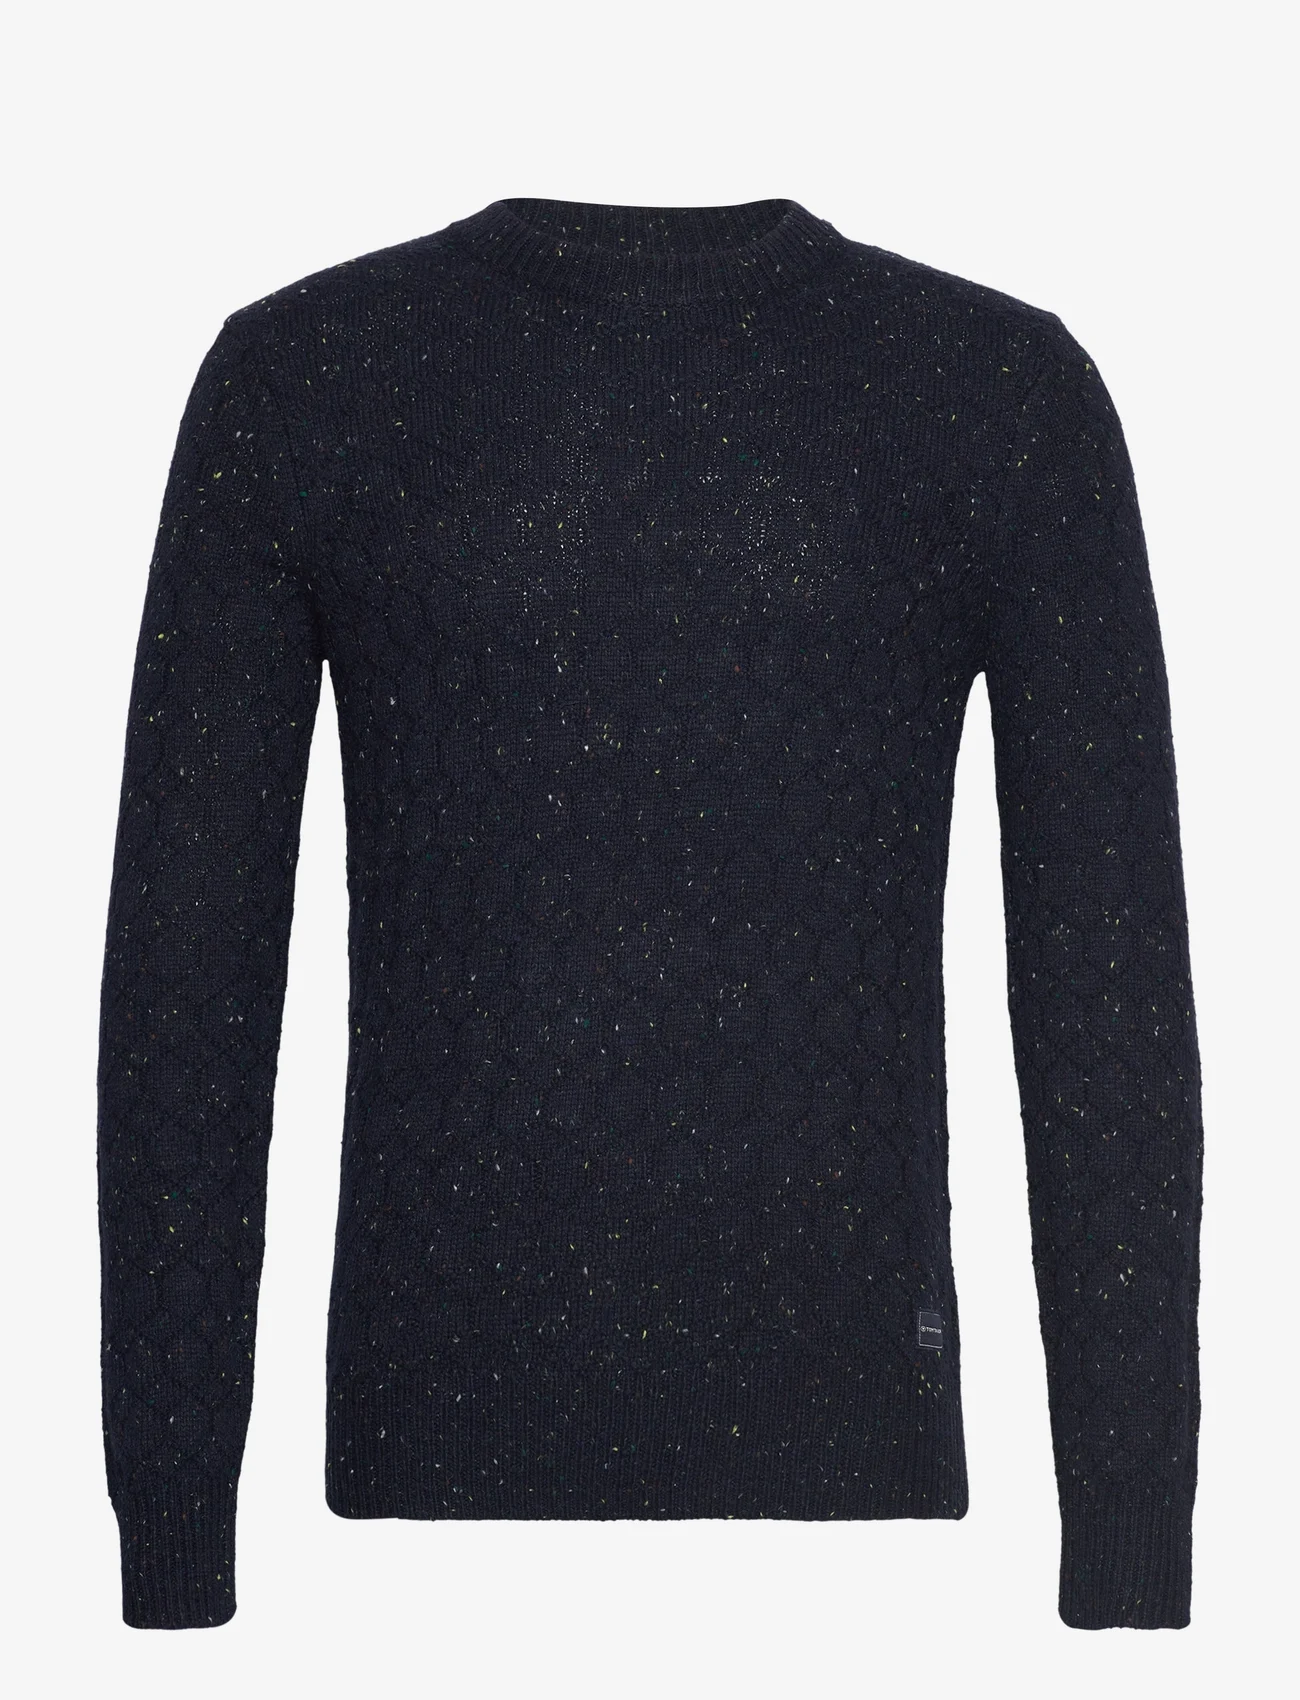 Tom Tailor - nep structured knit pullover - basic knitwear - navy melange nep structure - 0